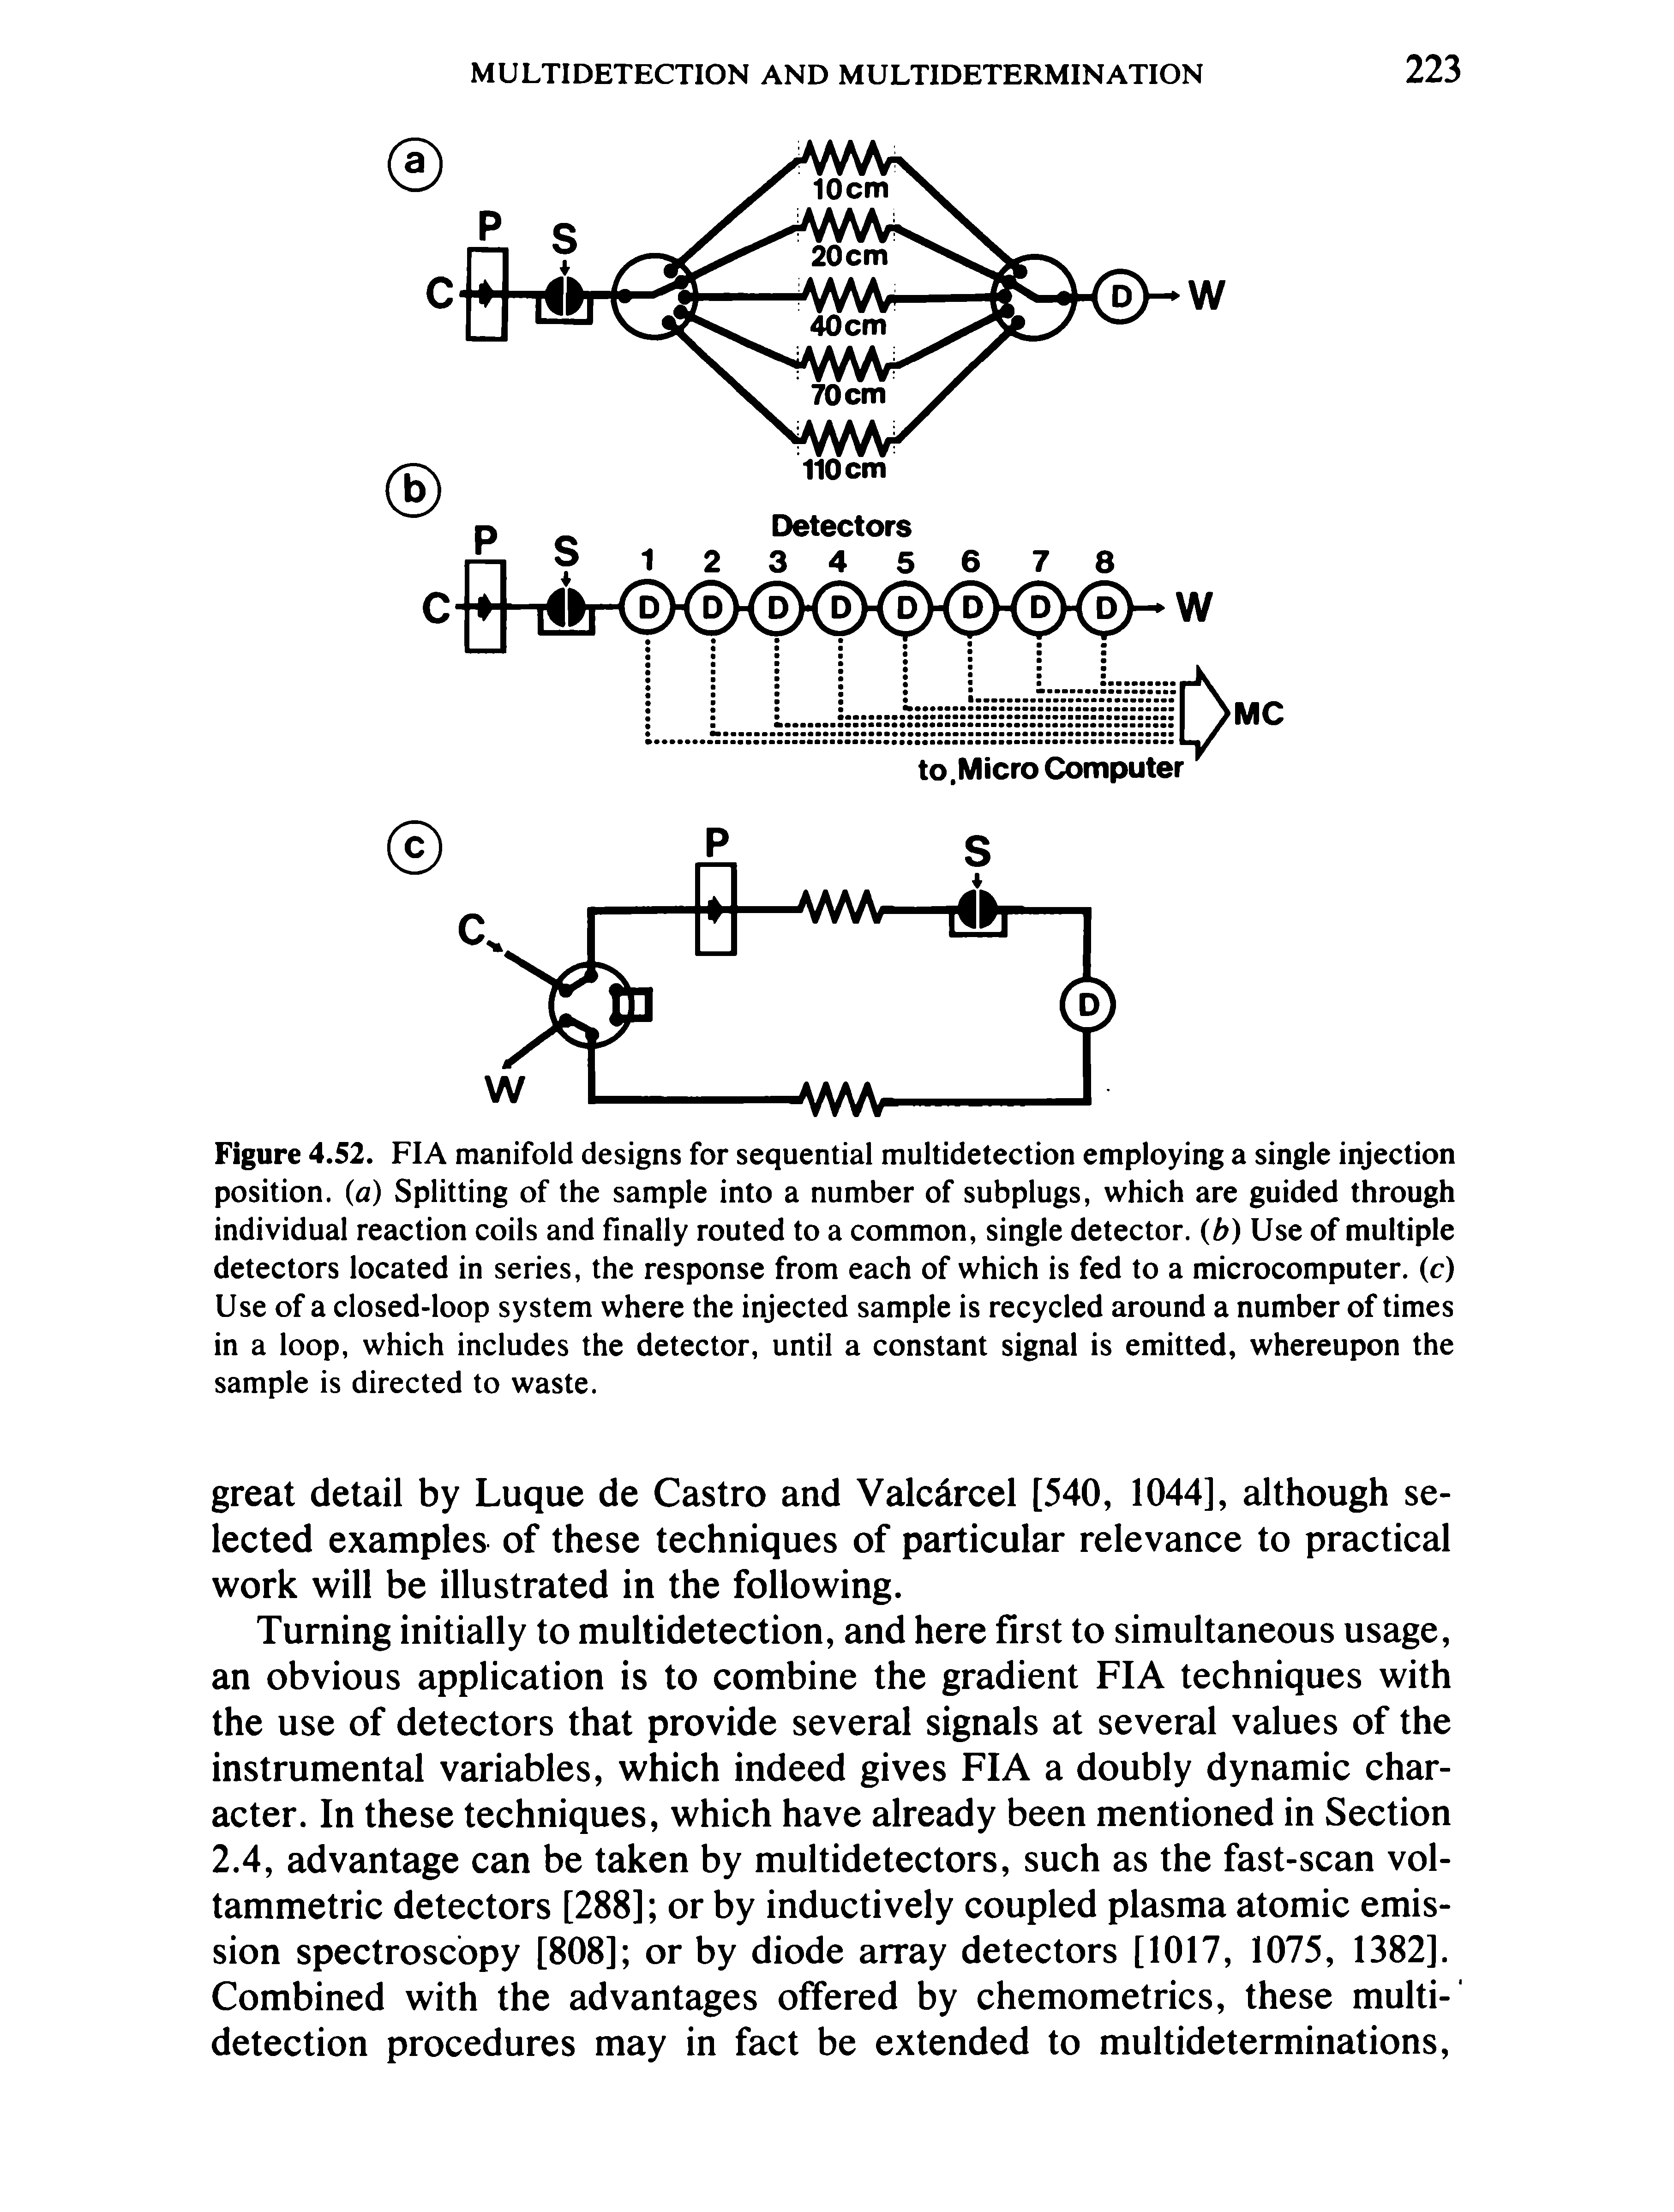 Figure 4.52. FIA manifold designs for sequential multidetection employing a single injection position, (a) Splitting of the sample into a number of subplugs, which are guided through individual reaction coils and finally routed to a common, single detector, (b) Use of multiple detectors located in series, the response from each of which is fed to a microcomputer, (c) Use of a closed-loop system where the injected sample is recycled around a number of times in a loop, which includes the detector, until a constant signal is emitted, whereupon the sample is directed to waste.